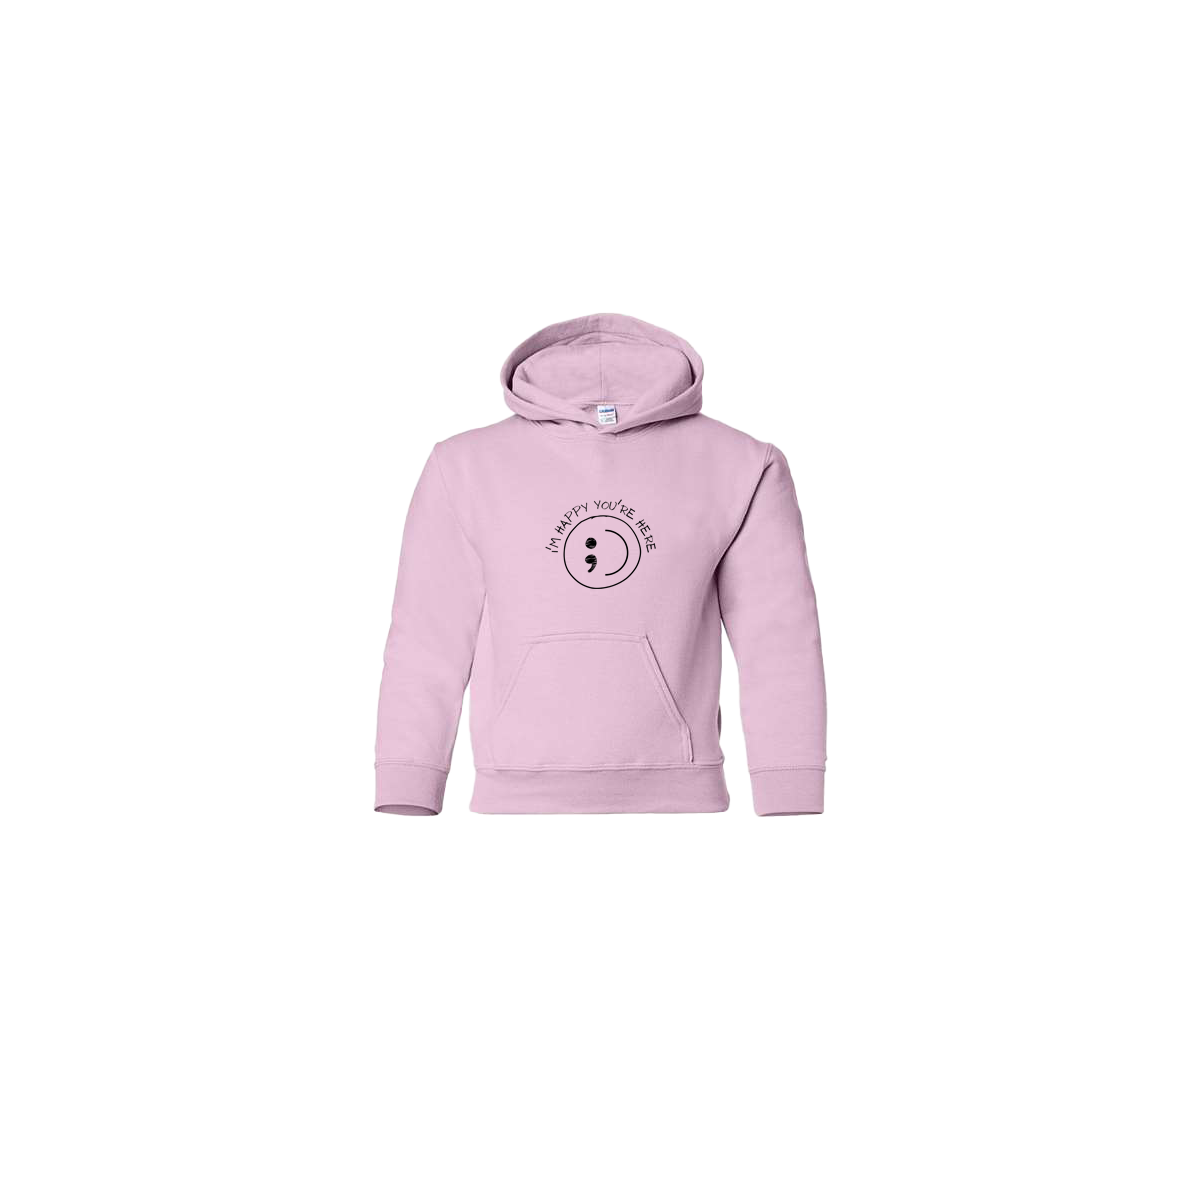 I'm Happy You're Here Embroidered Light Pink Youth Hoodie